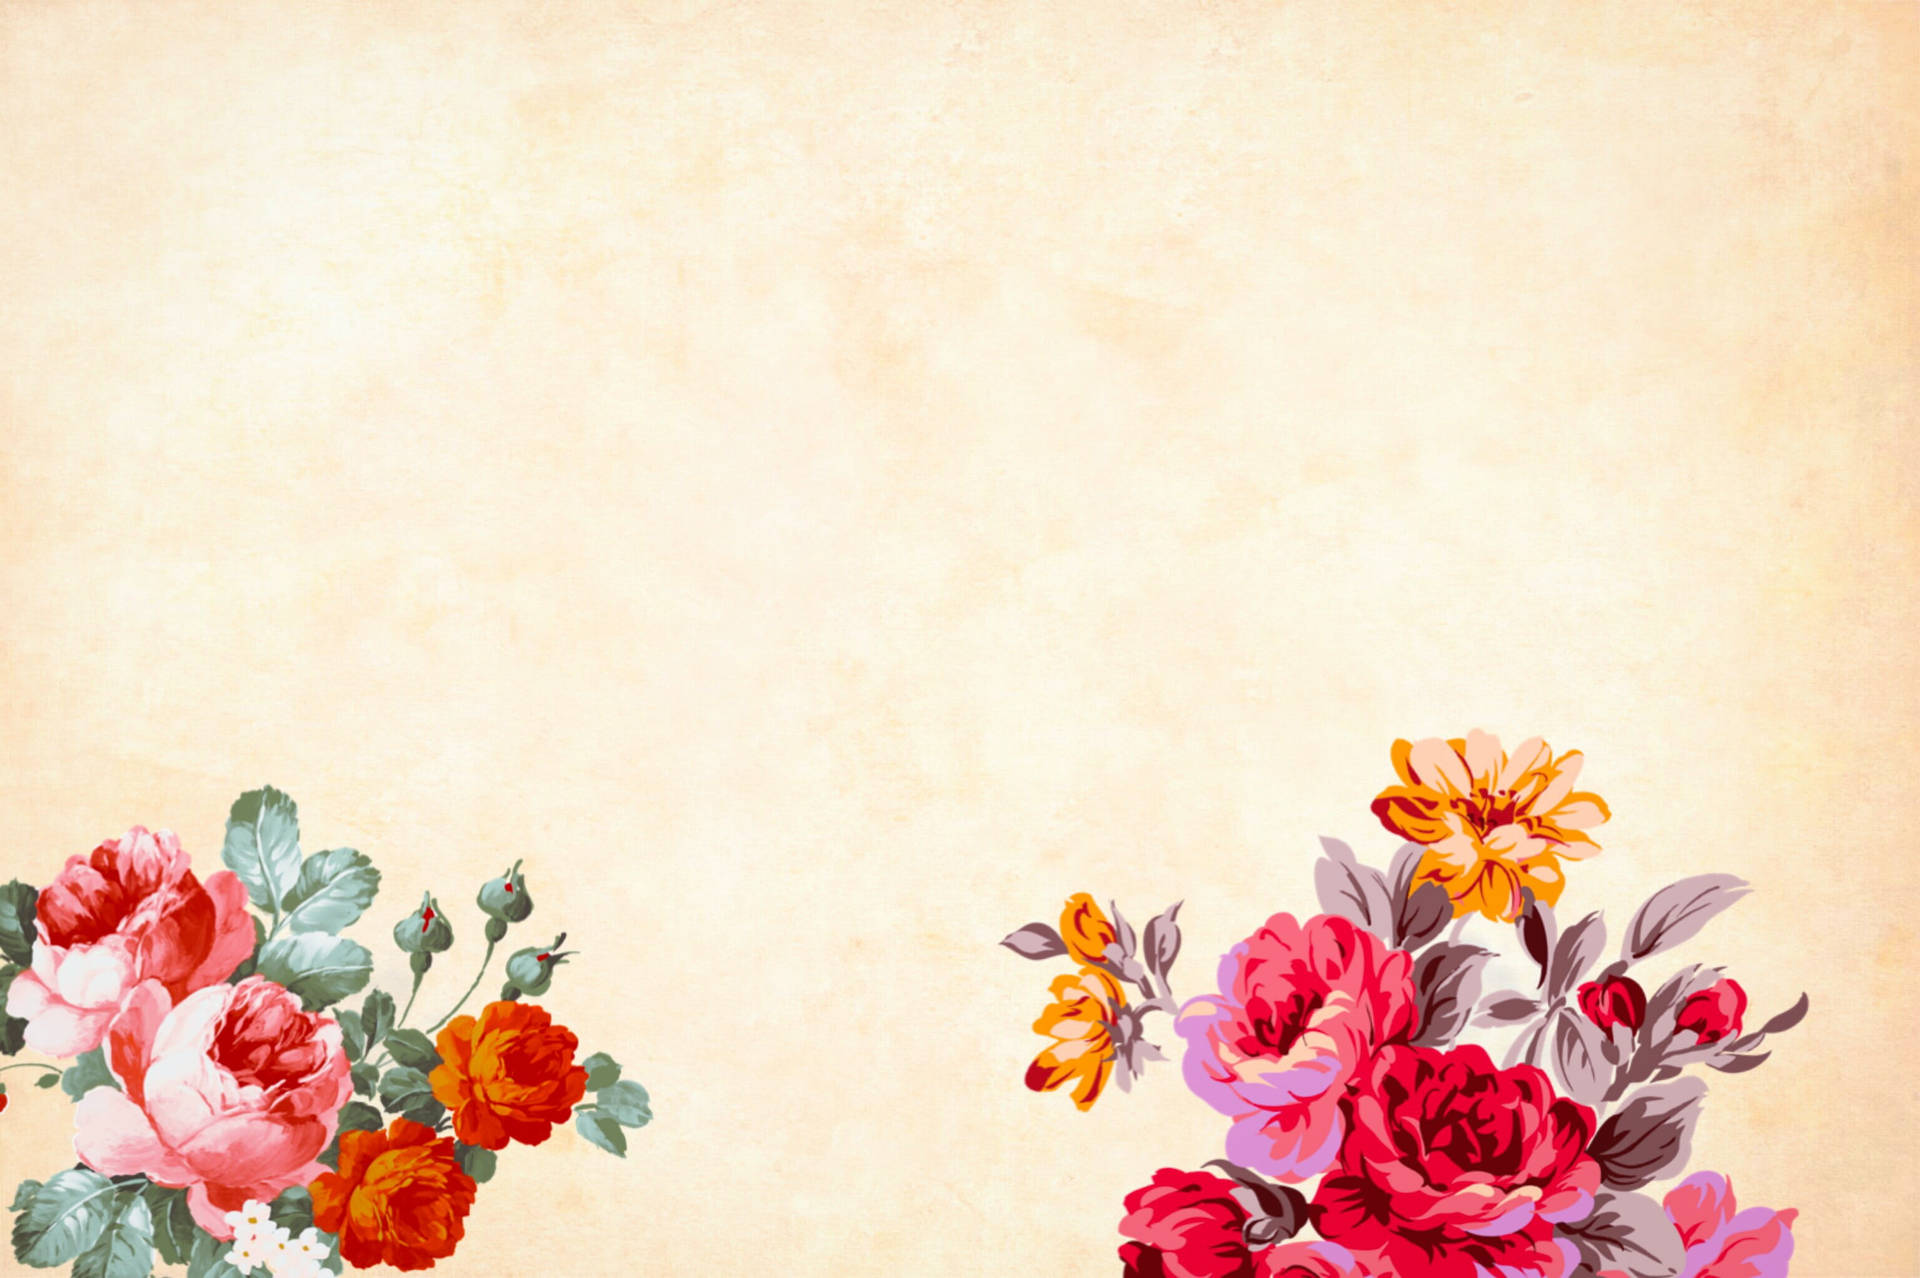 Background Design With Colorful Flowers Wallpaper